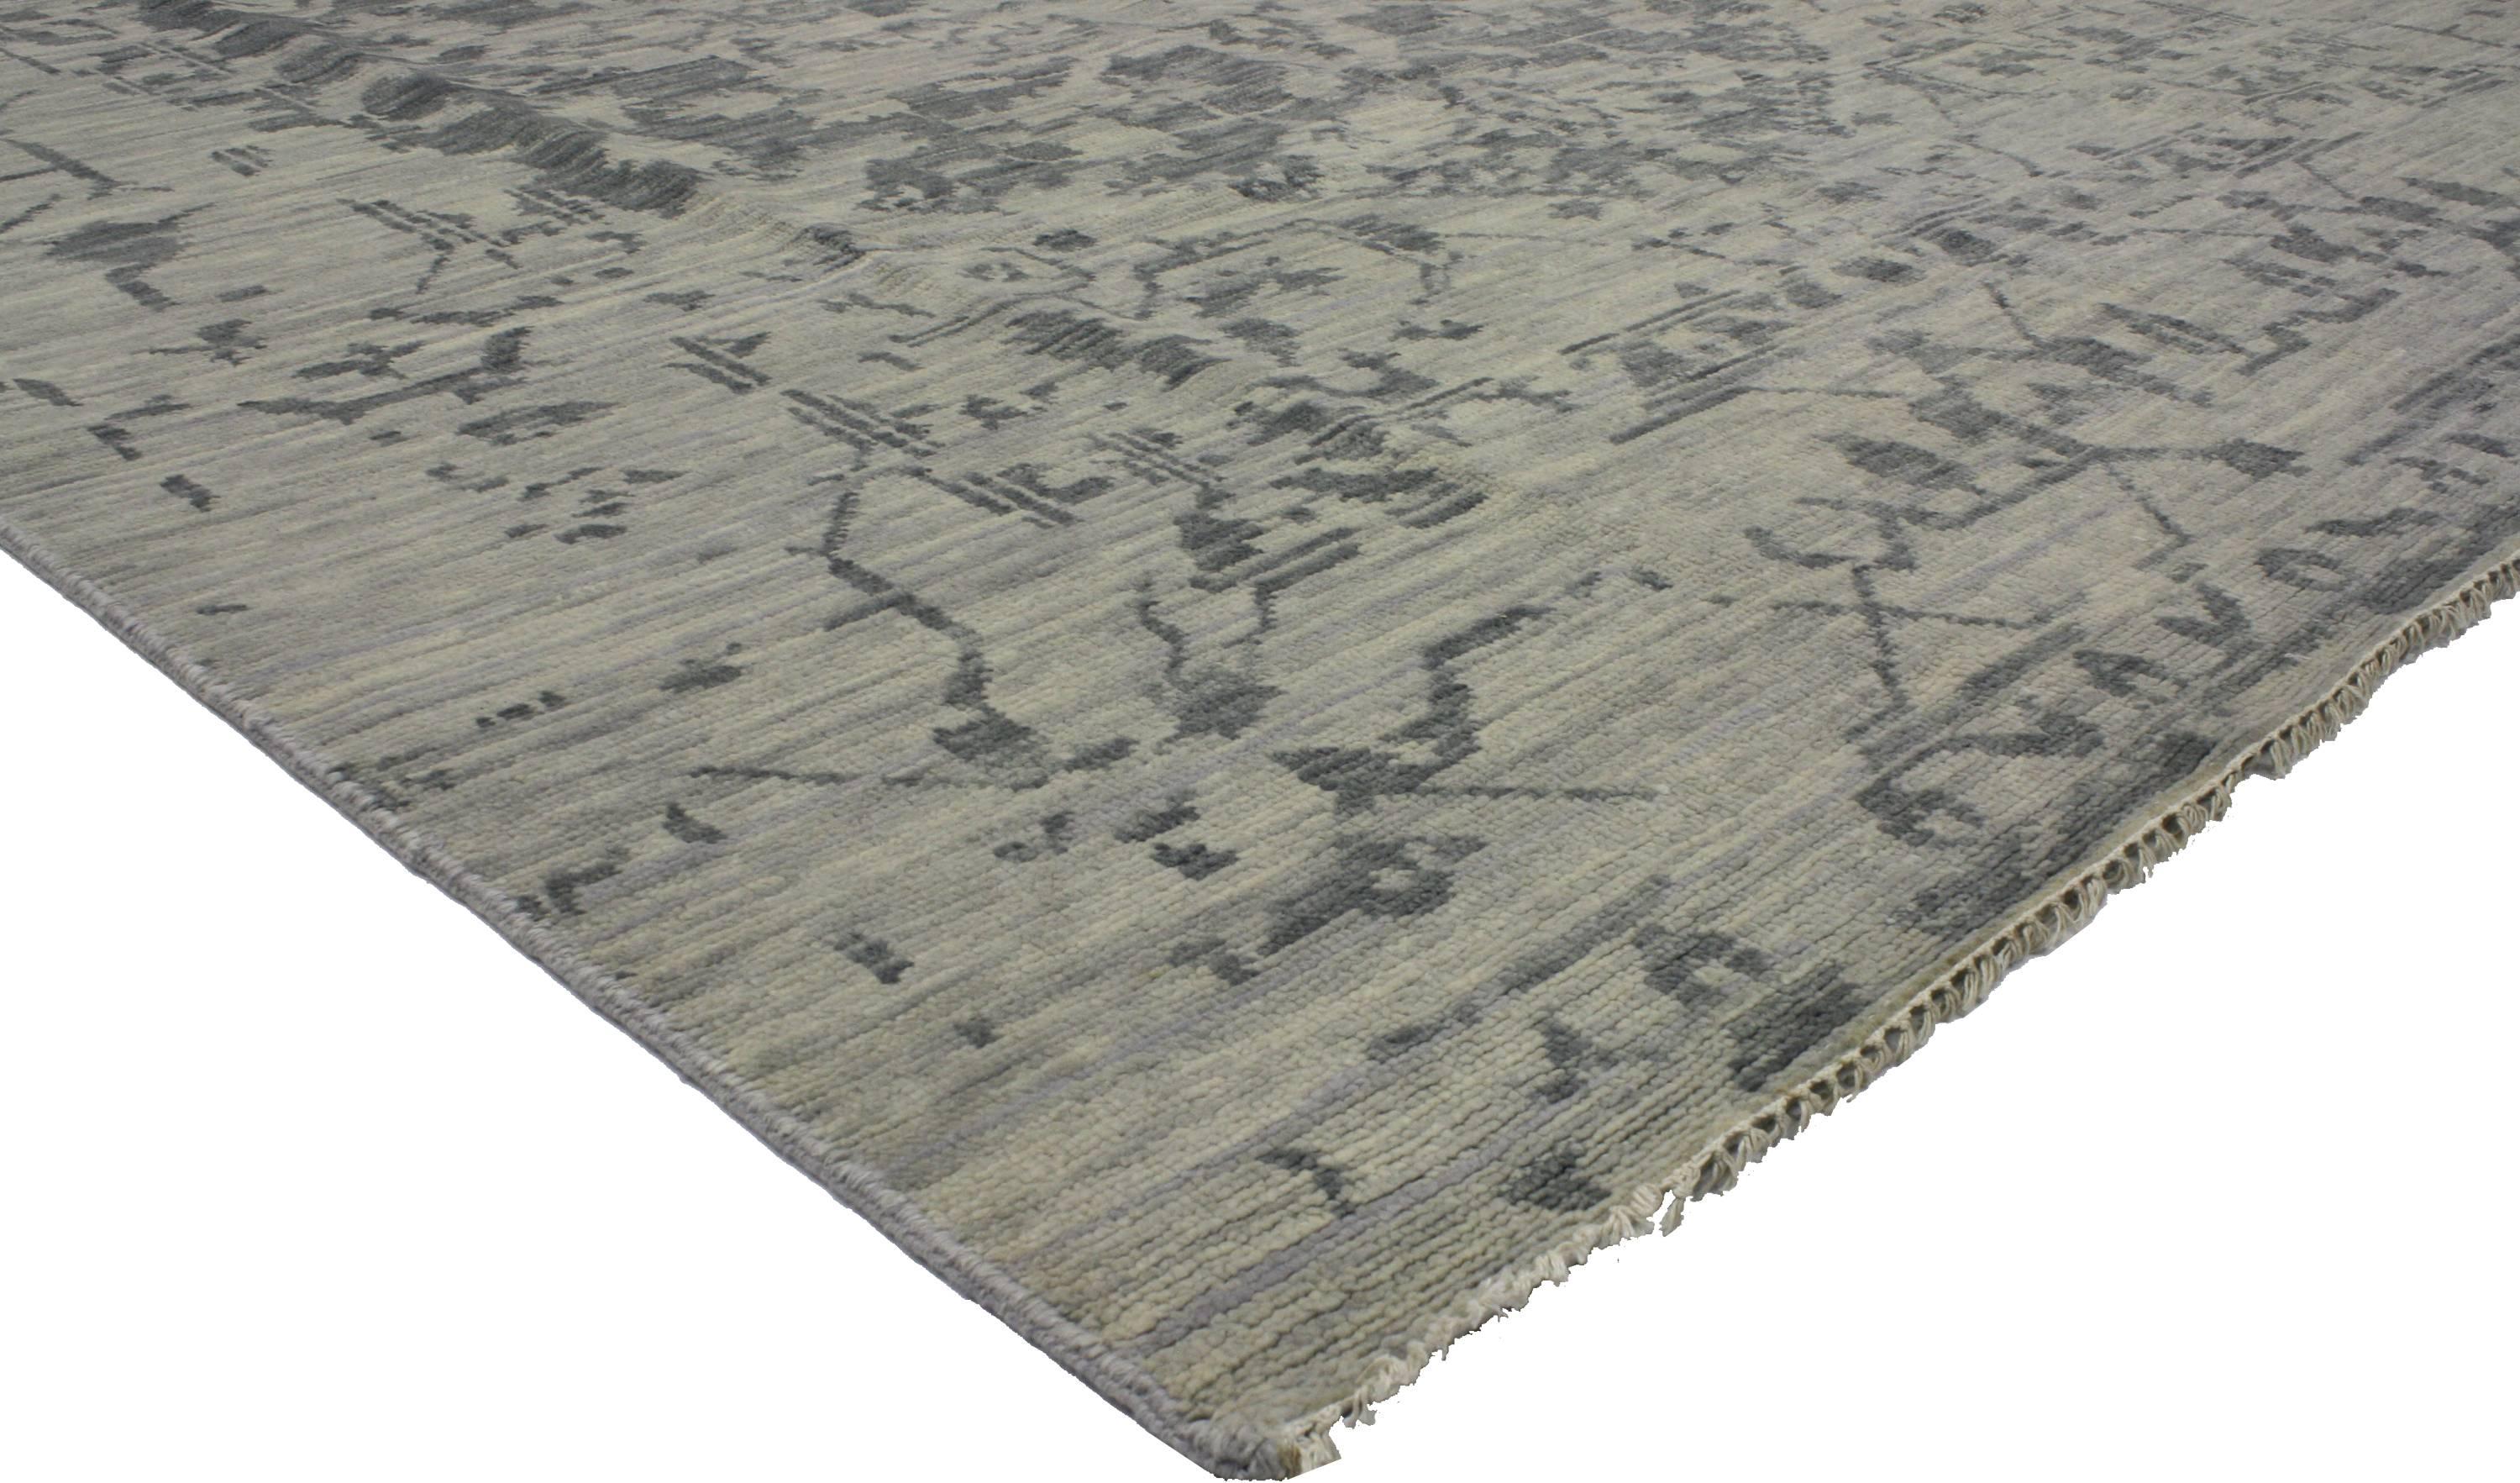 Give a time-honored look an energy infusion to your space with this modern gray rug. With its transitional style, erased design and variegated shades of gray, this hand-knotted wool rug can make a space feel polished, clean and calm. Going all-gray